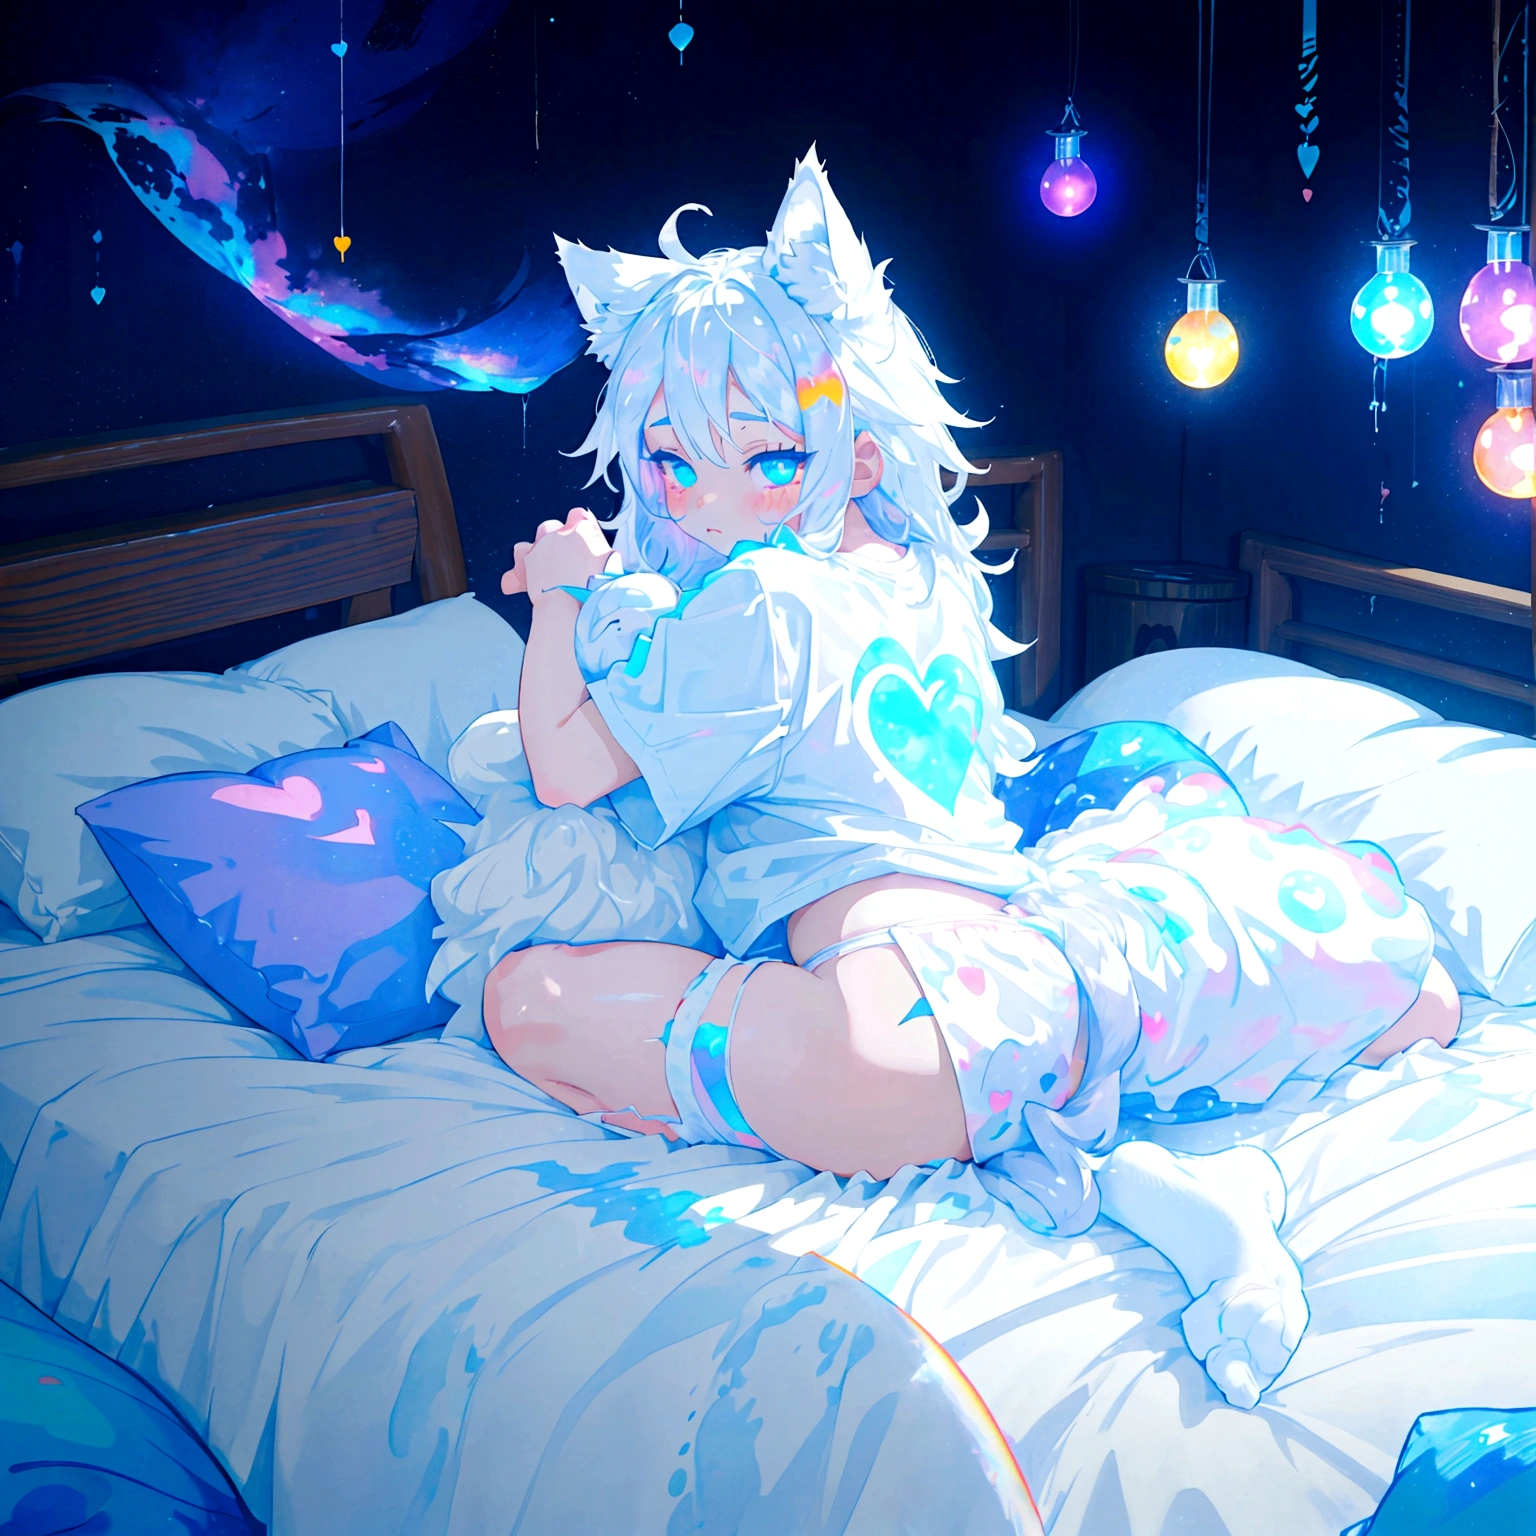 a cute adult male with wolf ears long white hair and a fluffy wolf tail, wearing bootyshorts and a tight t-shirt with a heart logo on it, has glowing blue eyes, is surrounded by dripping liquid galaxy rainbows, has very squishy thighs, wearing white thigh high socks, kawaii, on bed relaxing surrounded by plushies